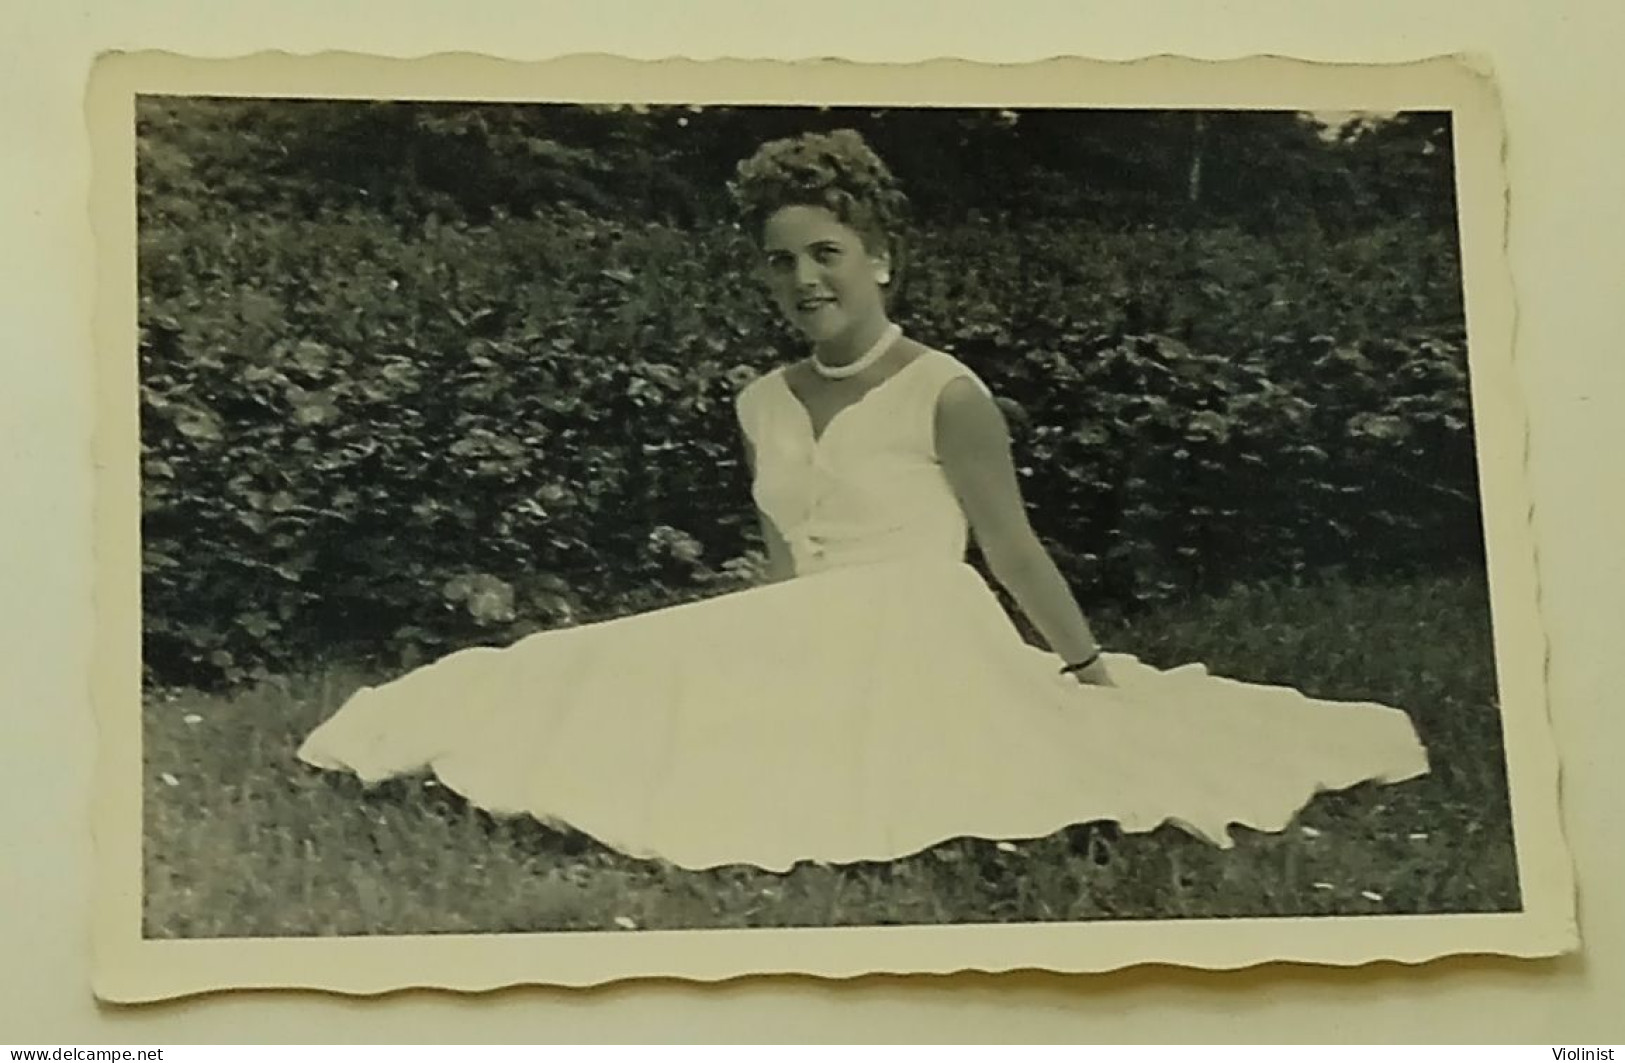 A Woman Sits On The Grass As Her White Dress Spreads - Anonymous Persons